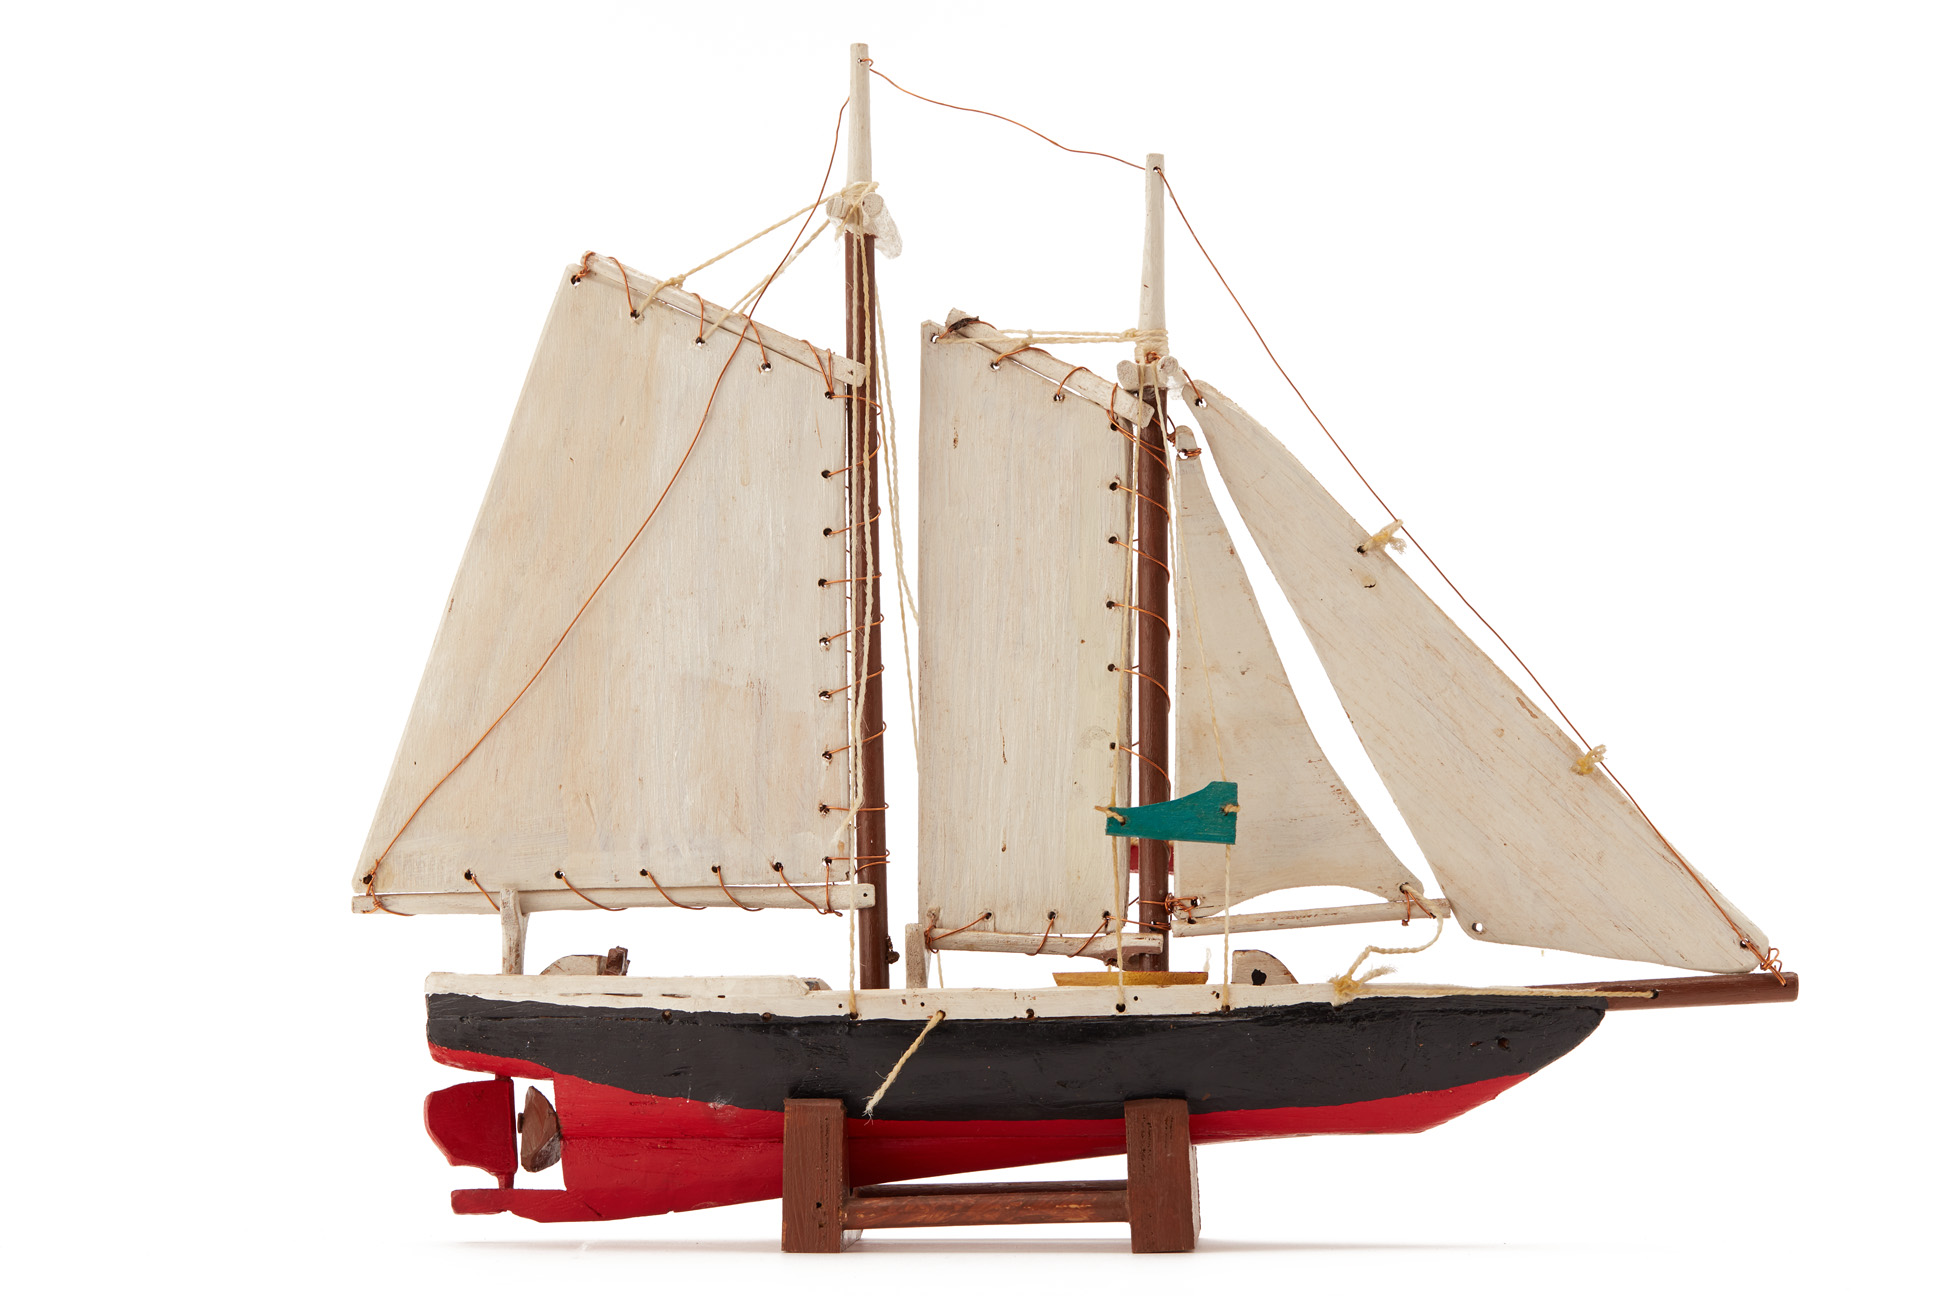 A RUSTIC HANDMADE WOODEN MODEL OF A SAILING BOAT - Image 2 of 2